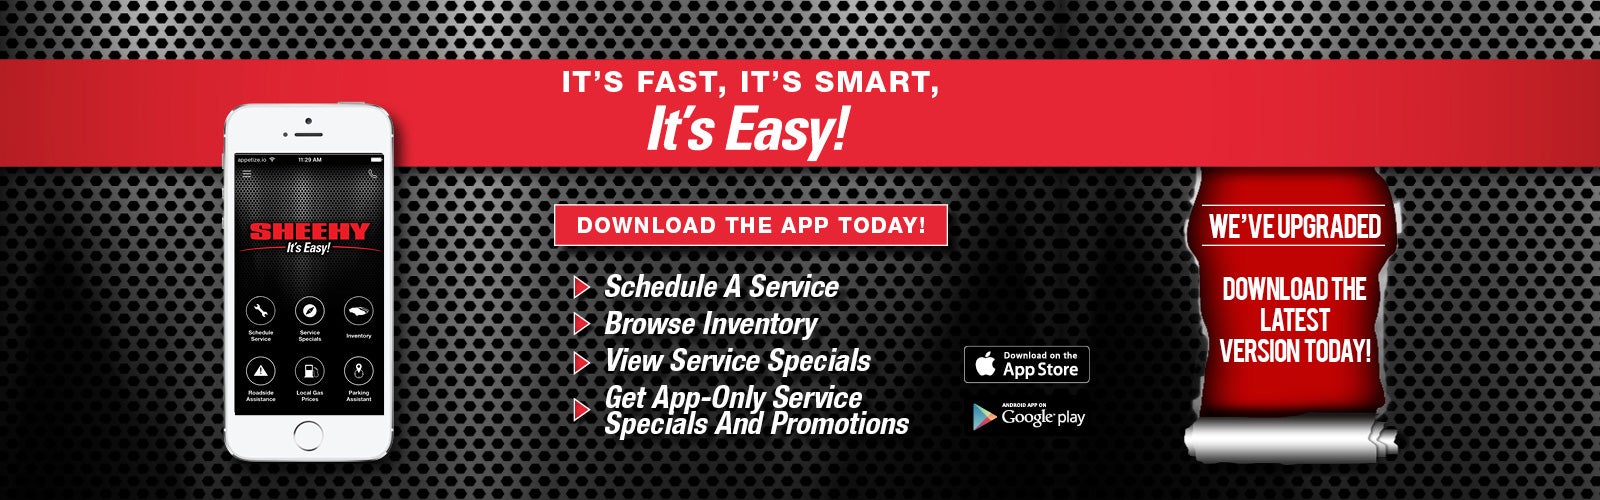 Download Our Mobile App | Sheehy INFINITI of Annapolis in Annapolis MD